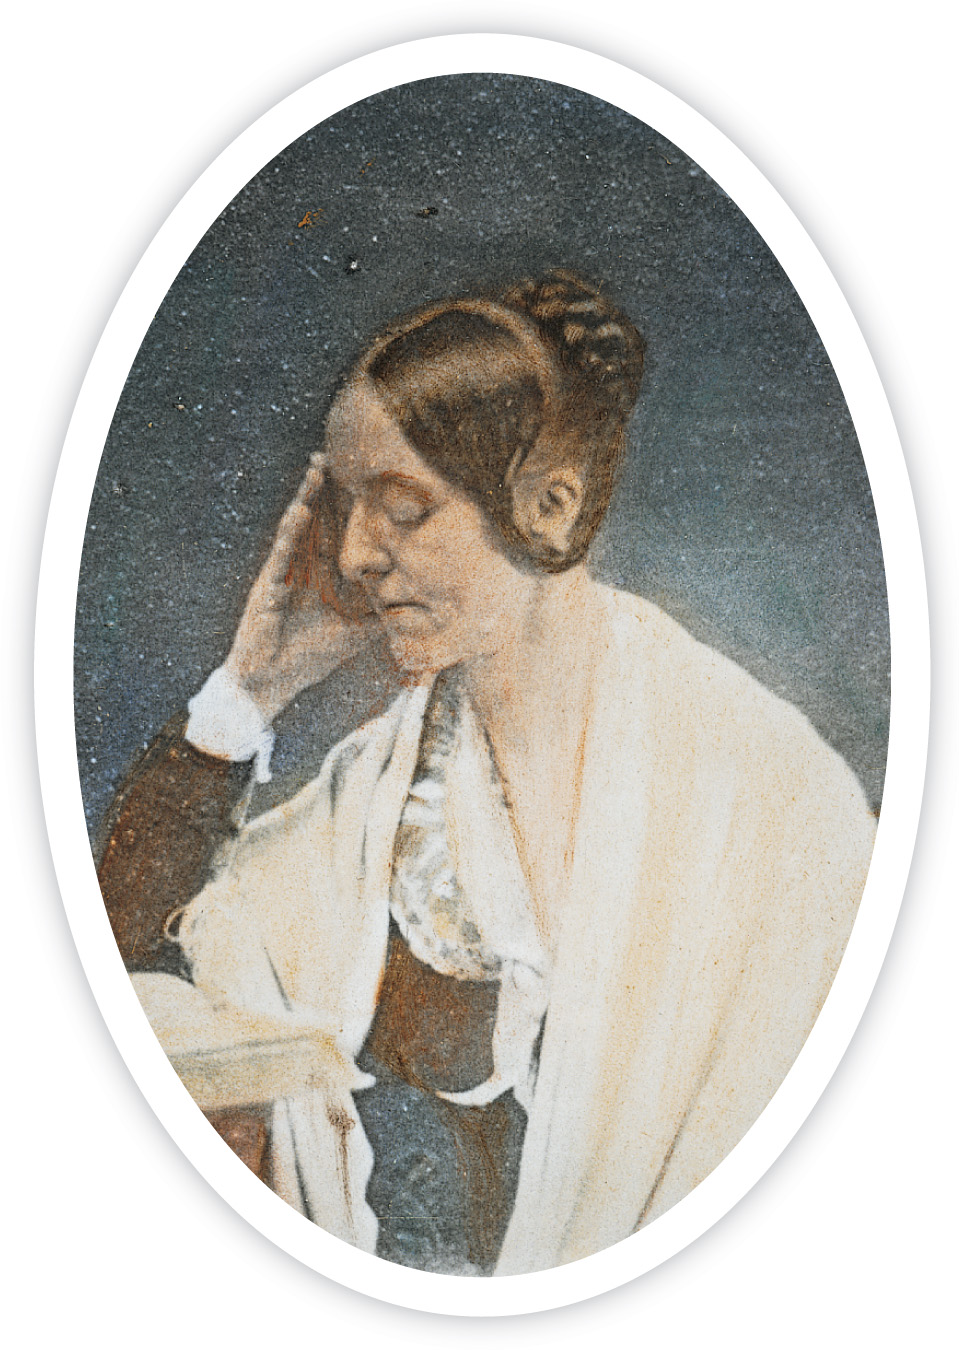 A painting: Margaret Fuller
reads a book.